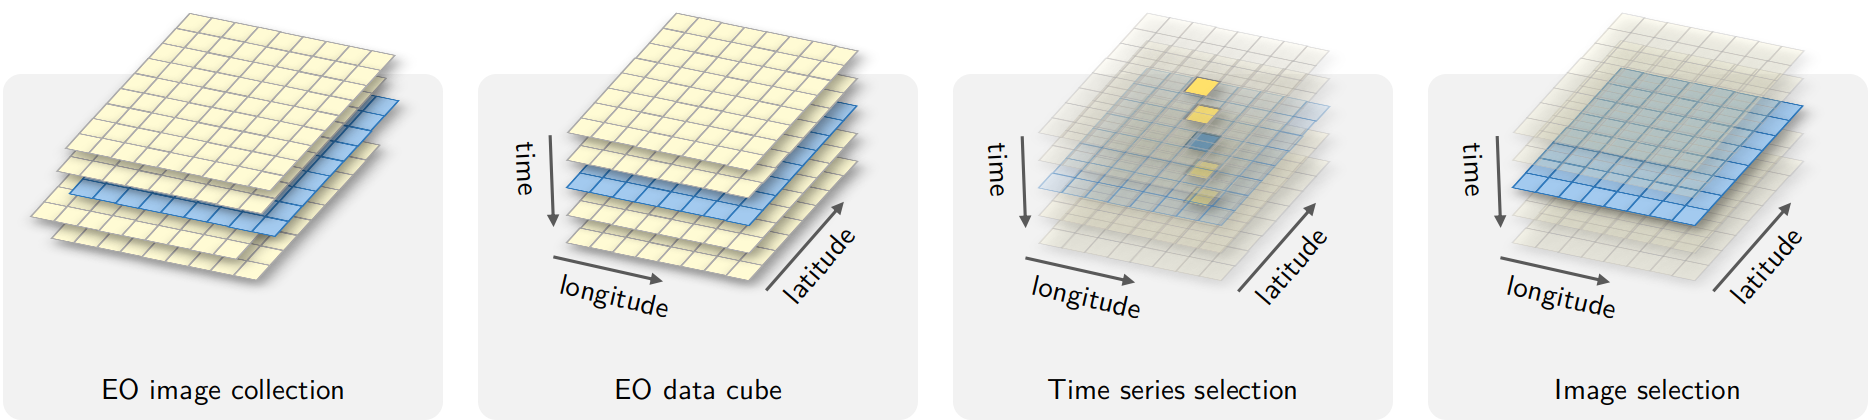 Conceptual view of data cubes (Source: Authors).